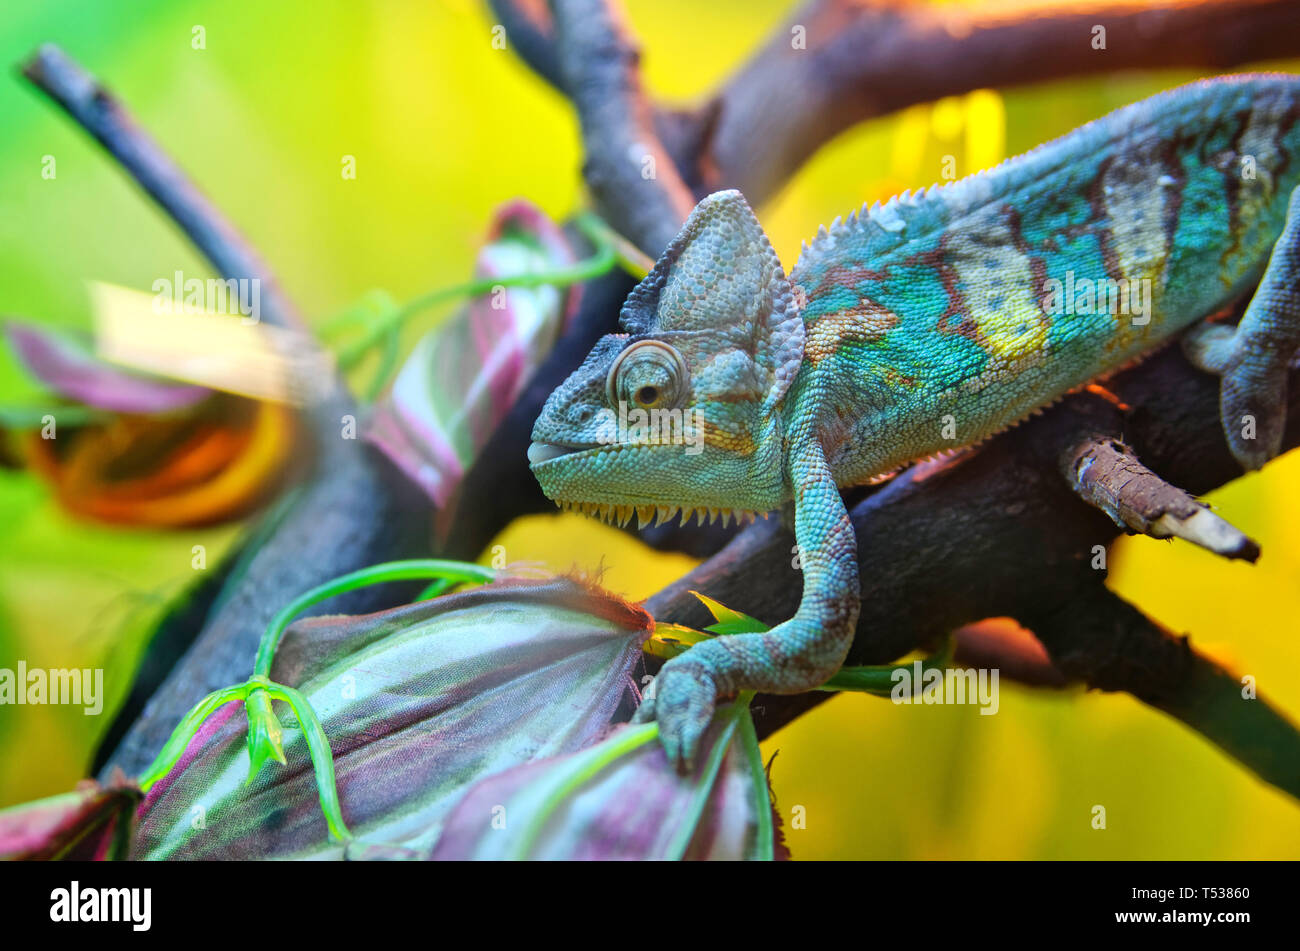 Chameleon on a tree branch. Successful disguise under a multi-colored environment. Reptile, lizard. Stock Photo